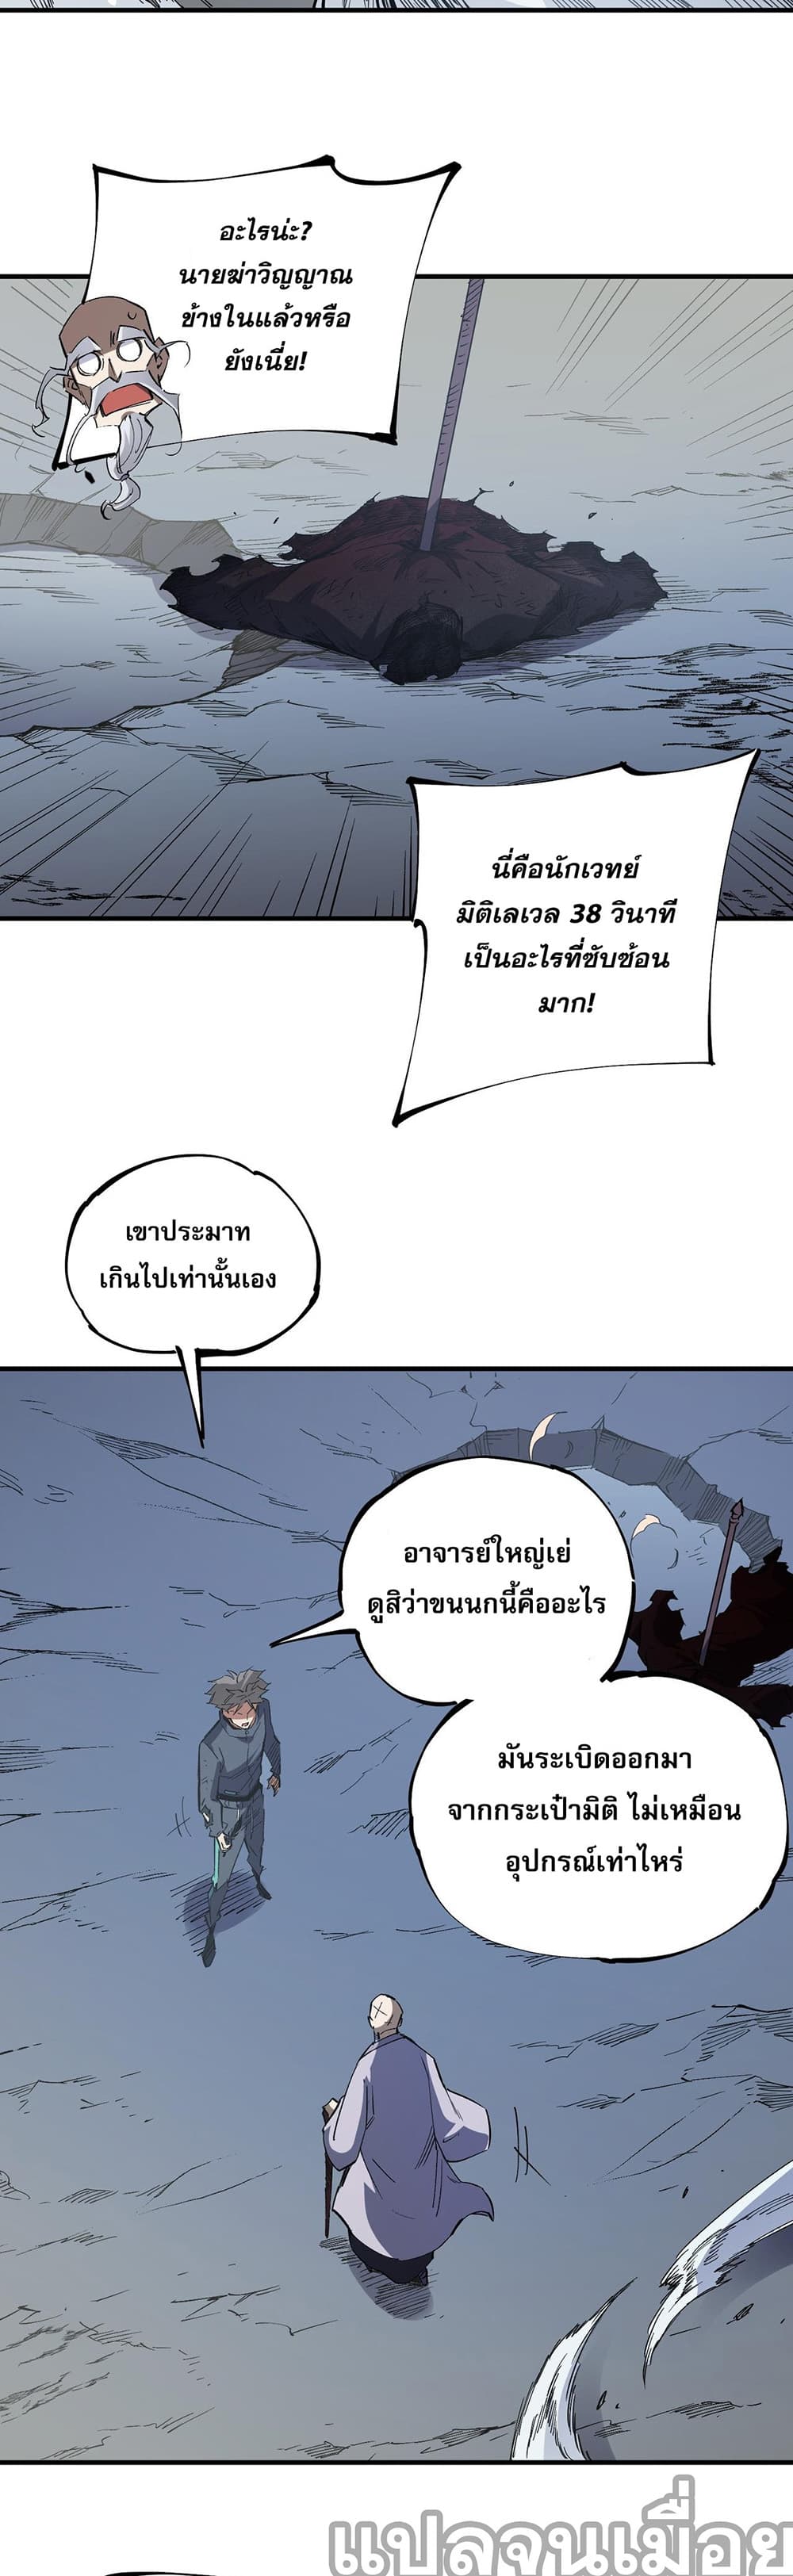 Job Changing for the Entire Population: The Jobless Me Will Terminate the Gods ฉันคือผู้เล่นไร้อาชีพที่สังหารเหล่าเทพ 44-44